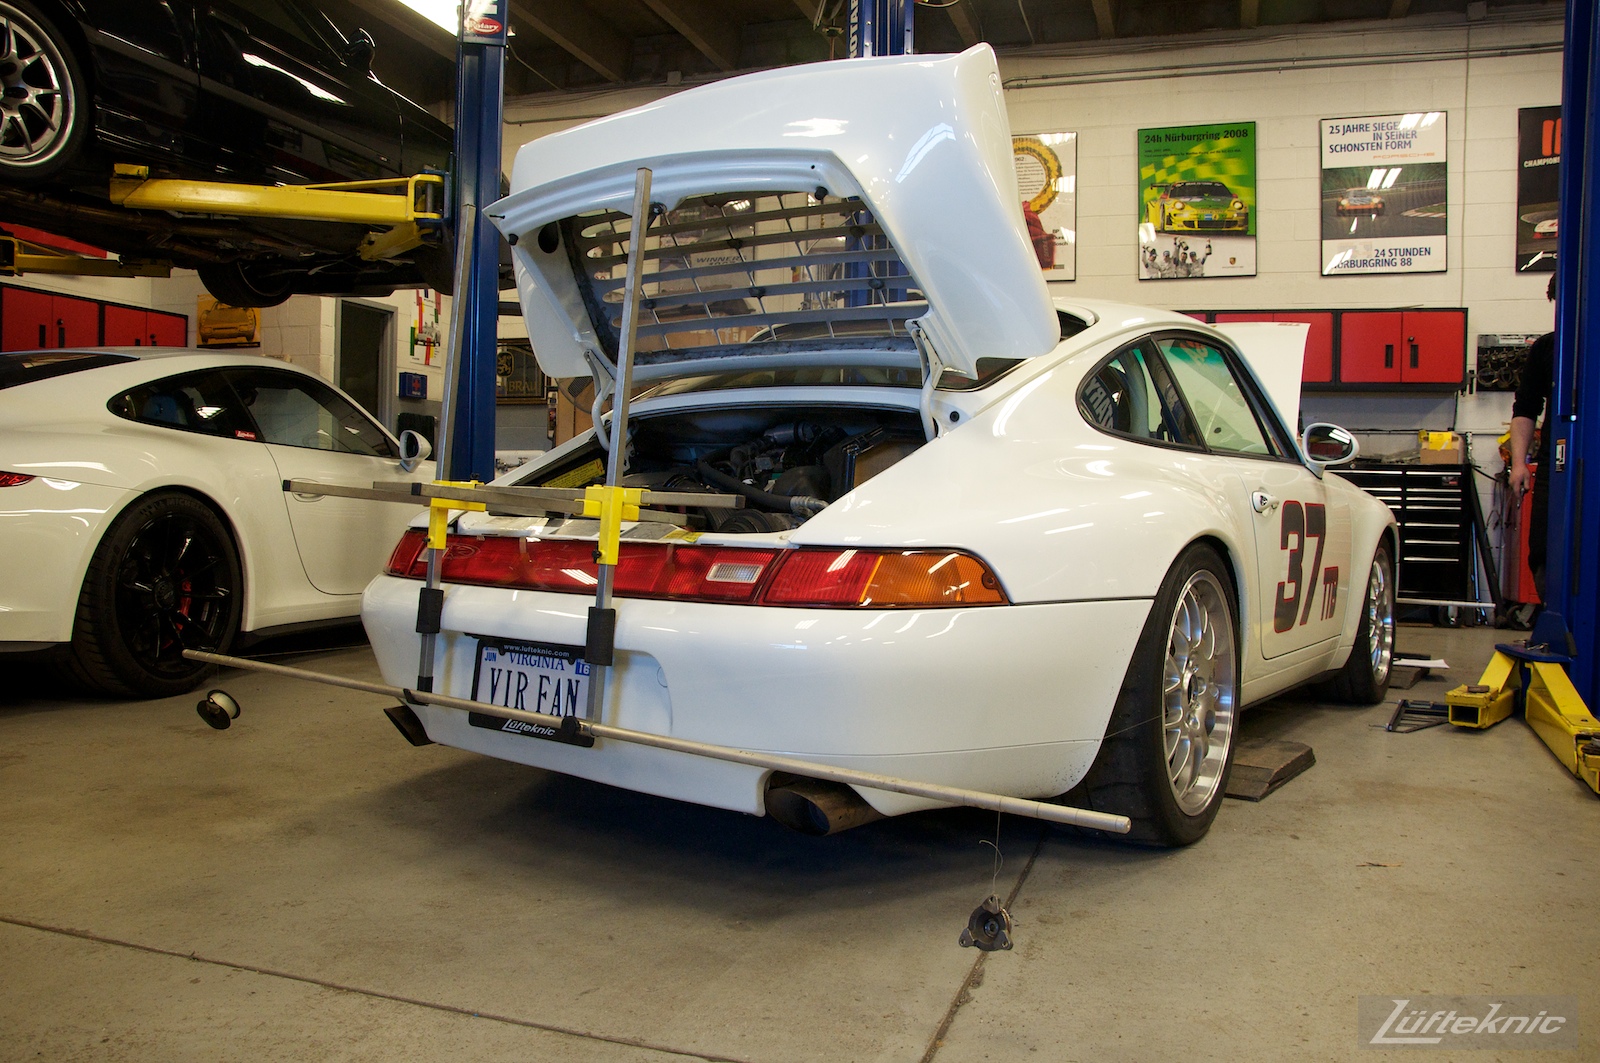 A white Porsche 993 race car inside the Lufteknic shop with alignment strings attached.